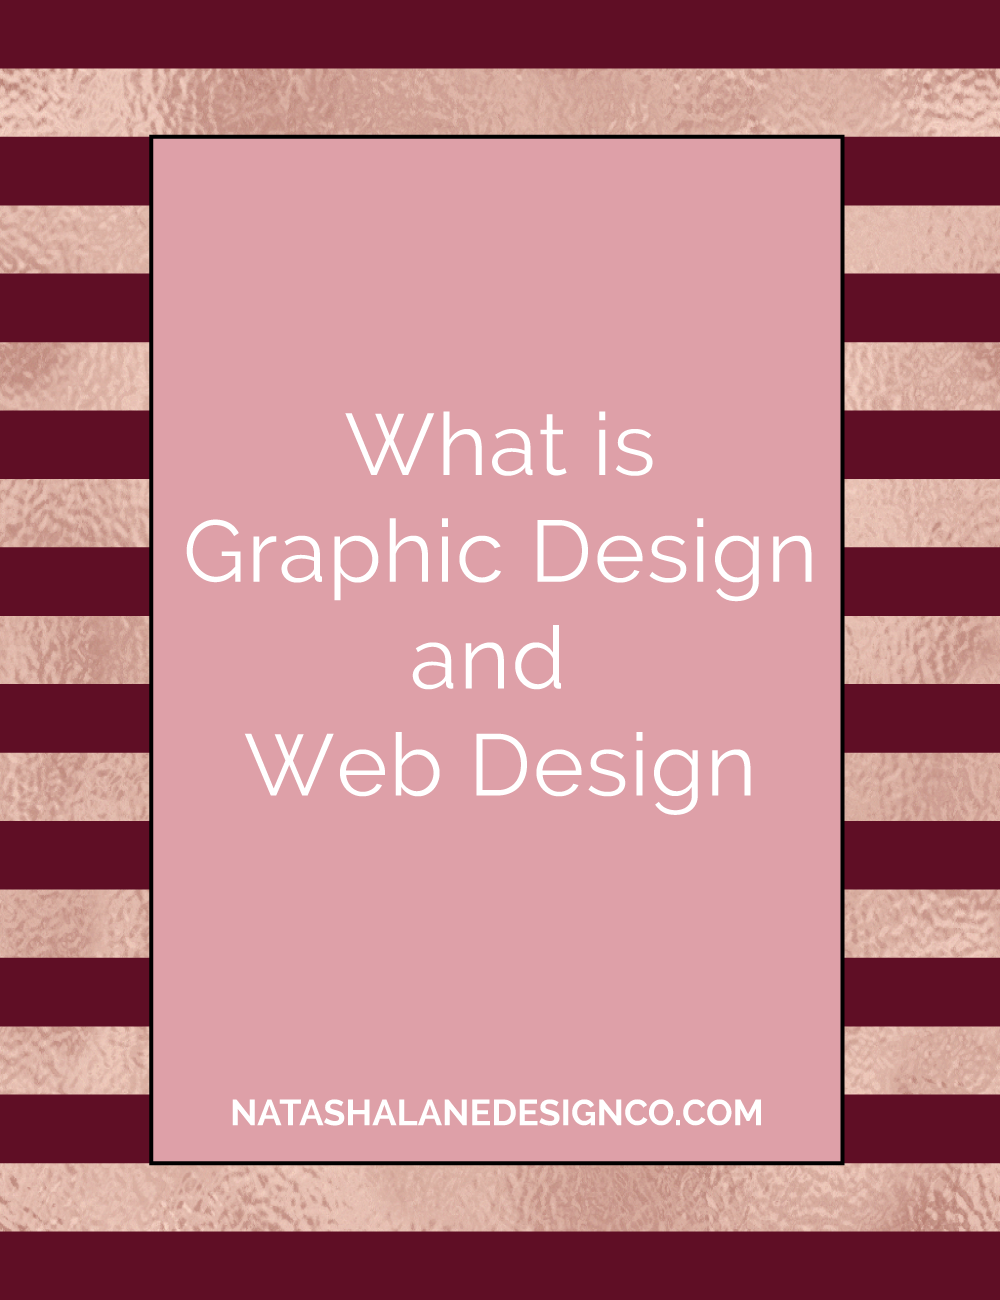 blog title- what is graphic design and web design